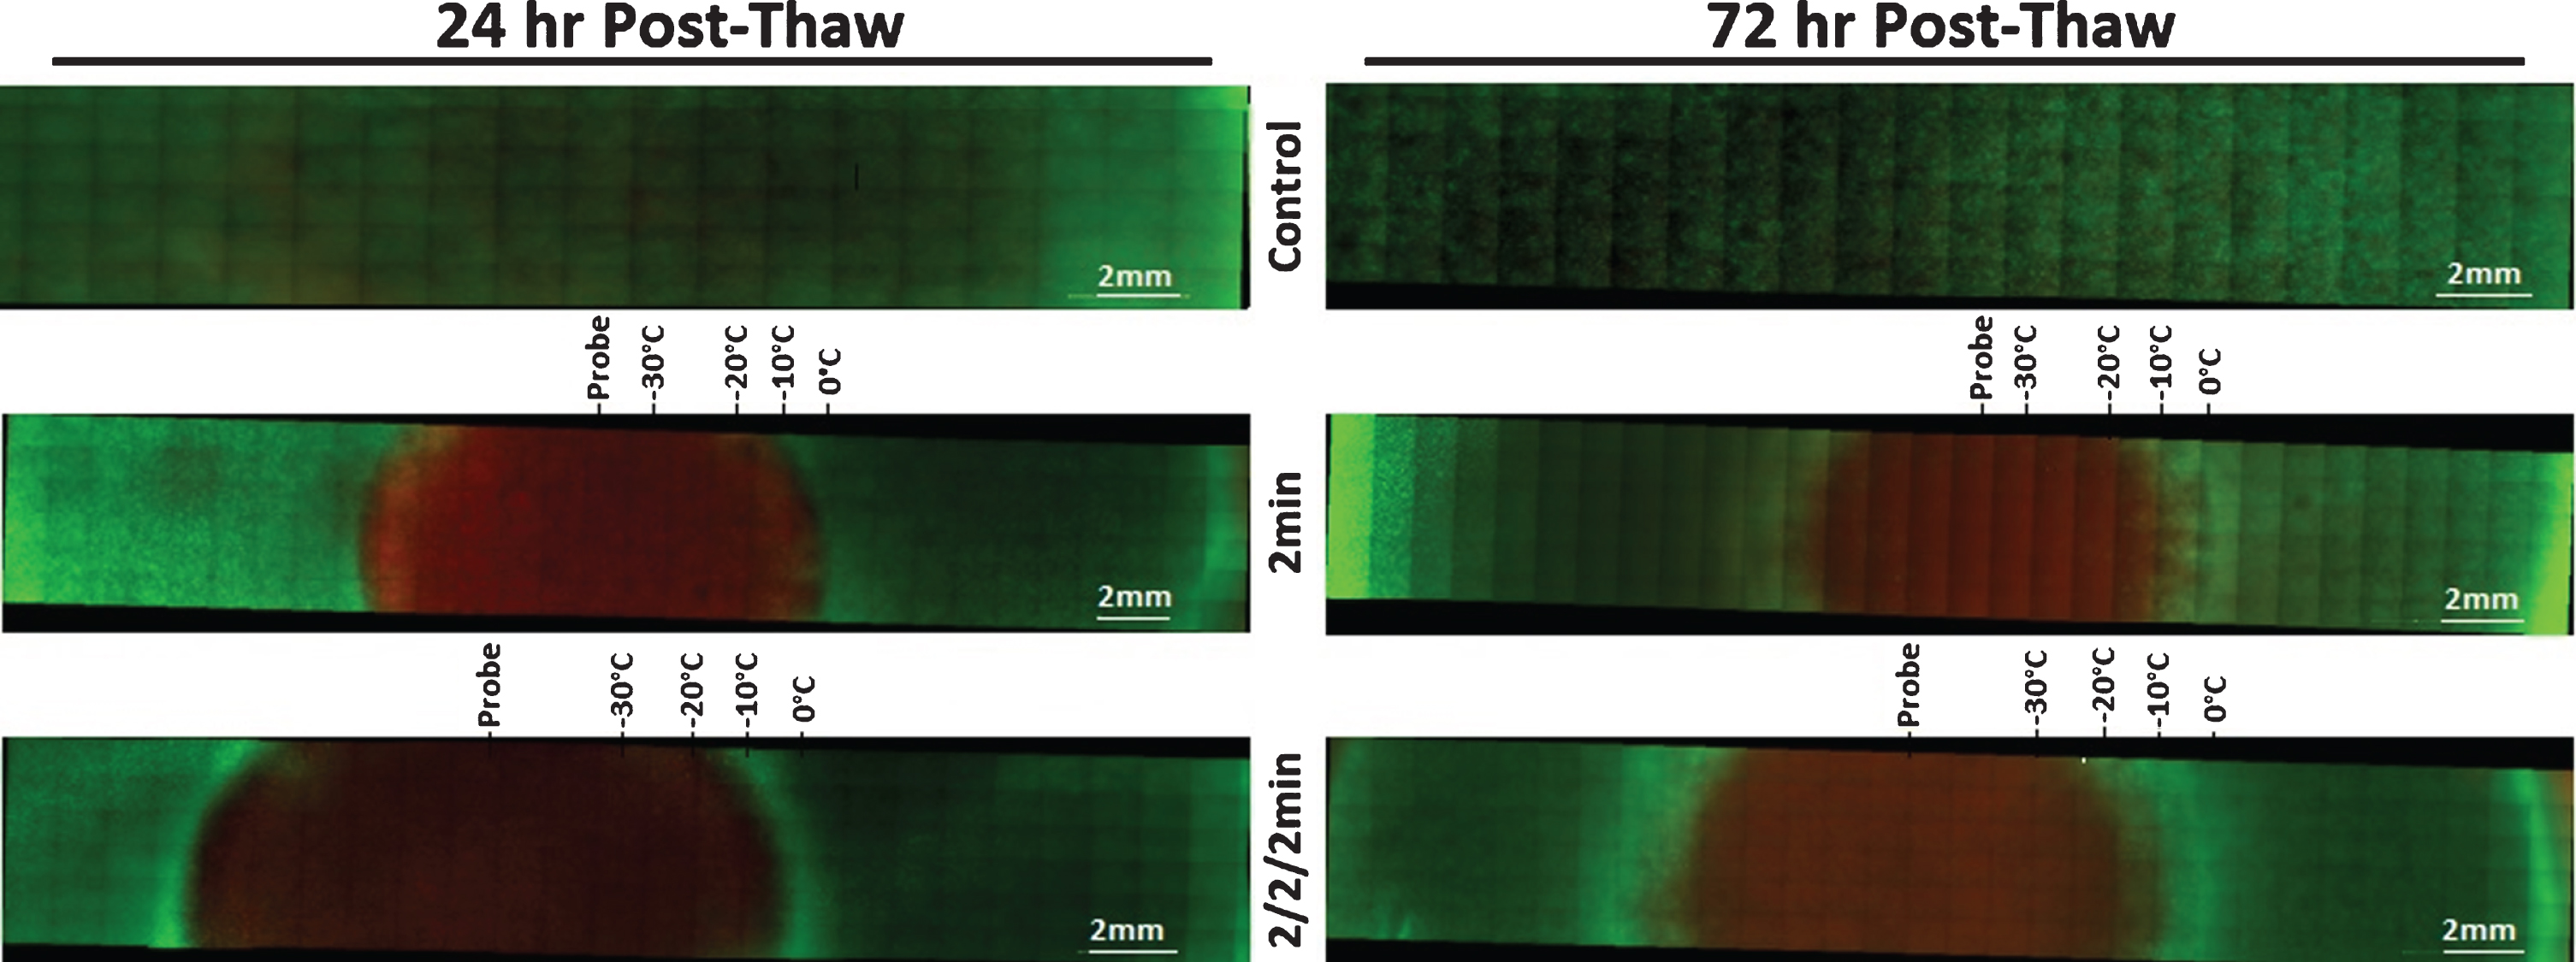 Fluorescent Micrographs of the UMUC3-TEMs Following Single and Double 2 min Freezes. At 24 hr (A) and 72 hr (B) post-thaw unfrozen controls, single freeze, and double freeze TEMs were probed with Calcein-AM (green, live) and Propidium Iodide (red, dead) and visualized using fluorescent microscopy to determine the extent of cell death. Images were stitched together from a 6×30 set of overlapping images using a 10X objective. Measurements were made using the Zeiss ZEN software and temperatures from the corresponding IR images were mapped to the micrographs.